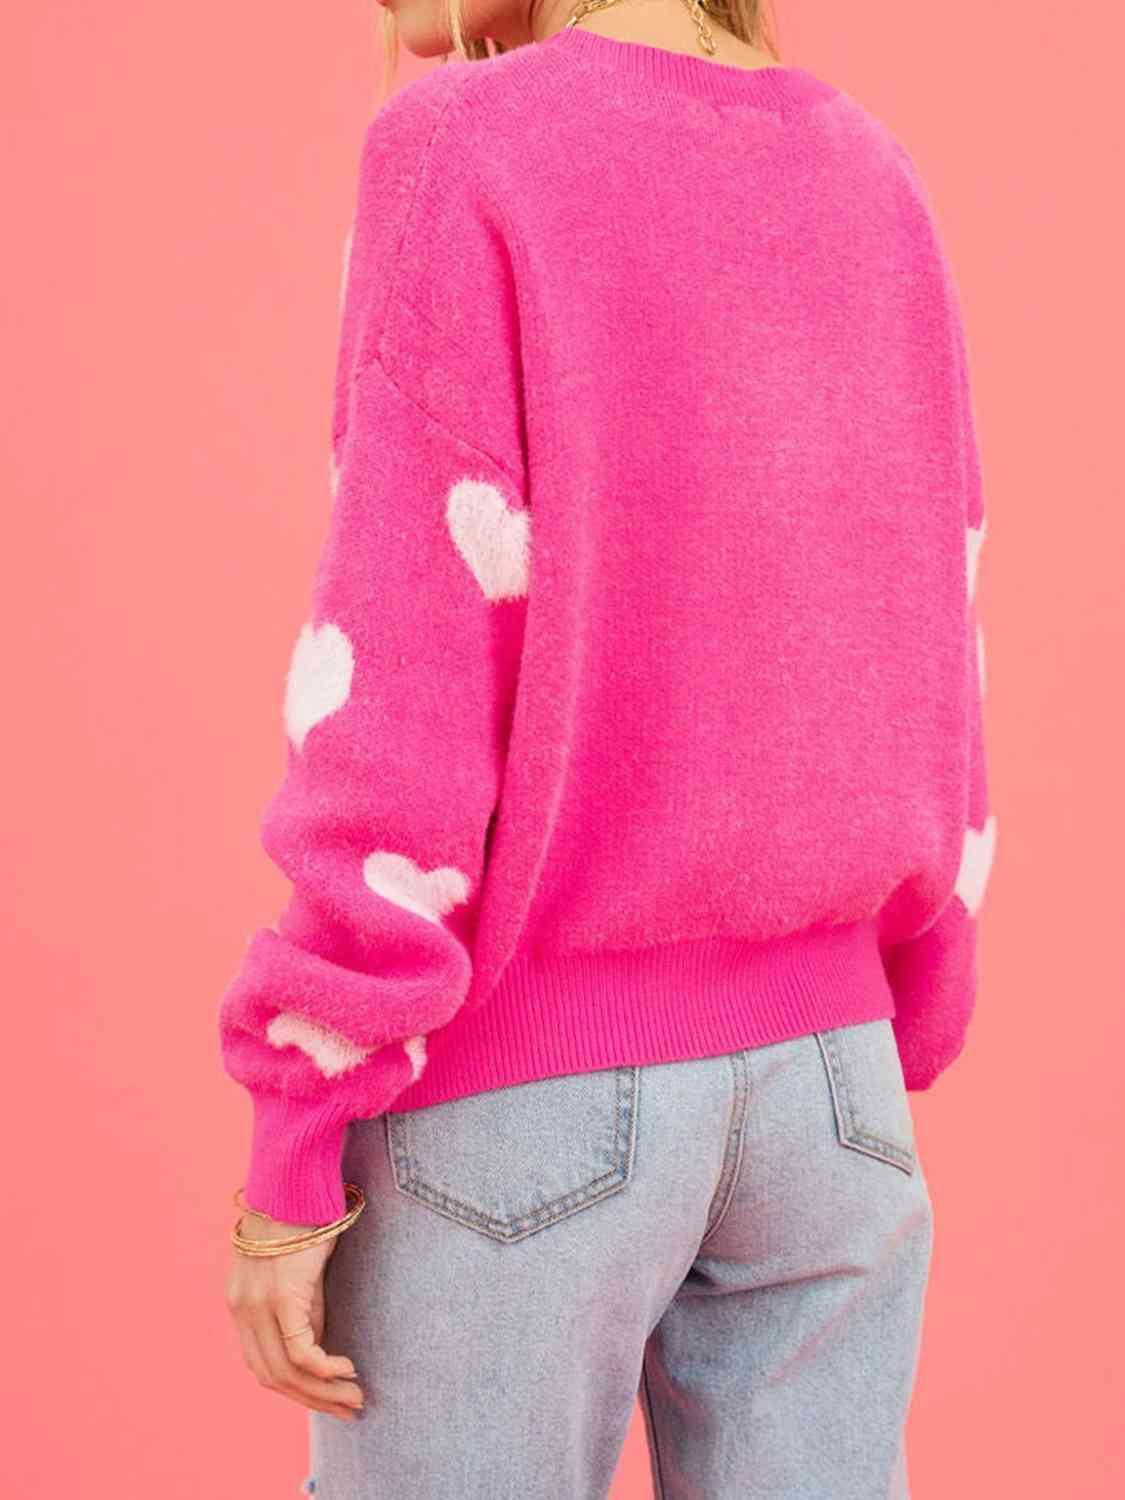 a woman wearing a pink sweater with white polka dots